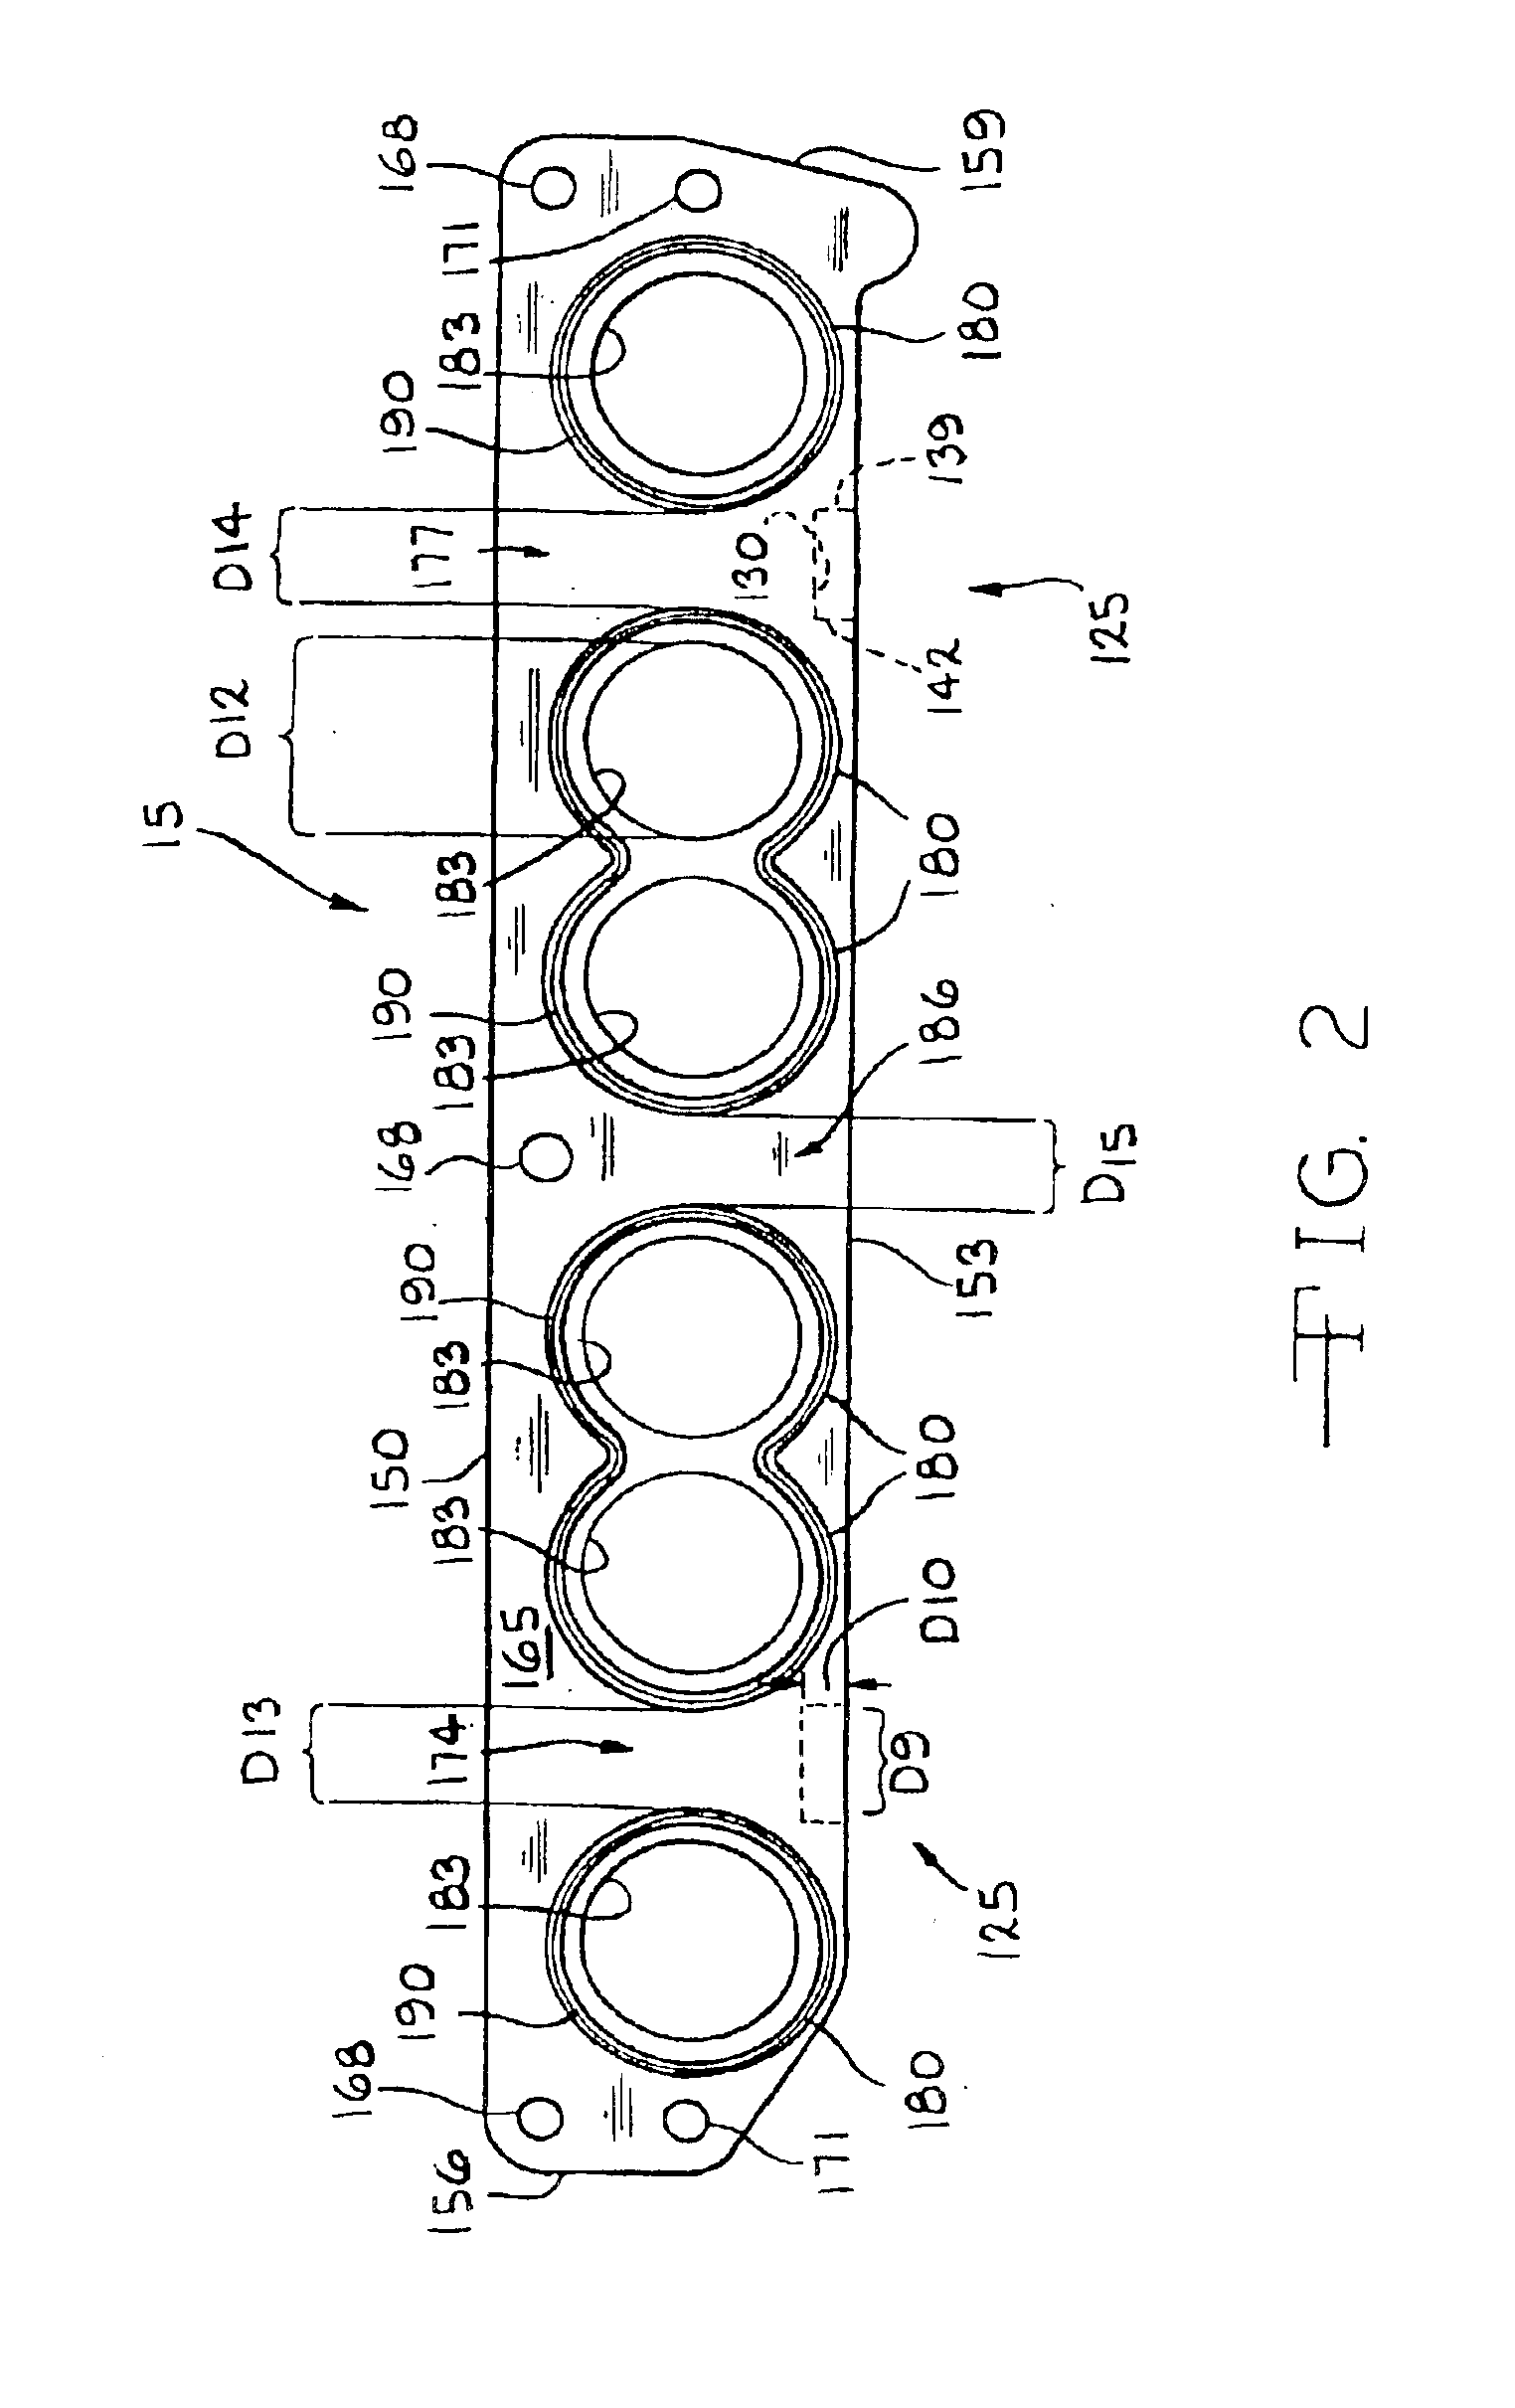 Mounting system for an air intake manifold assembly